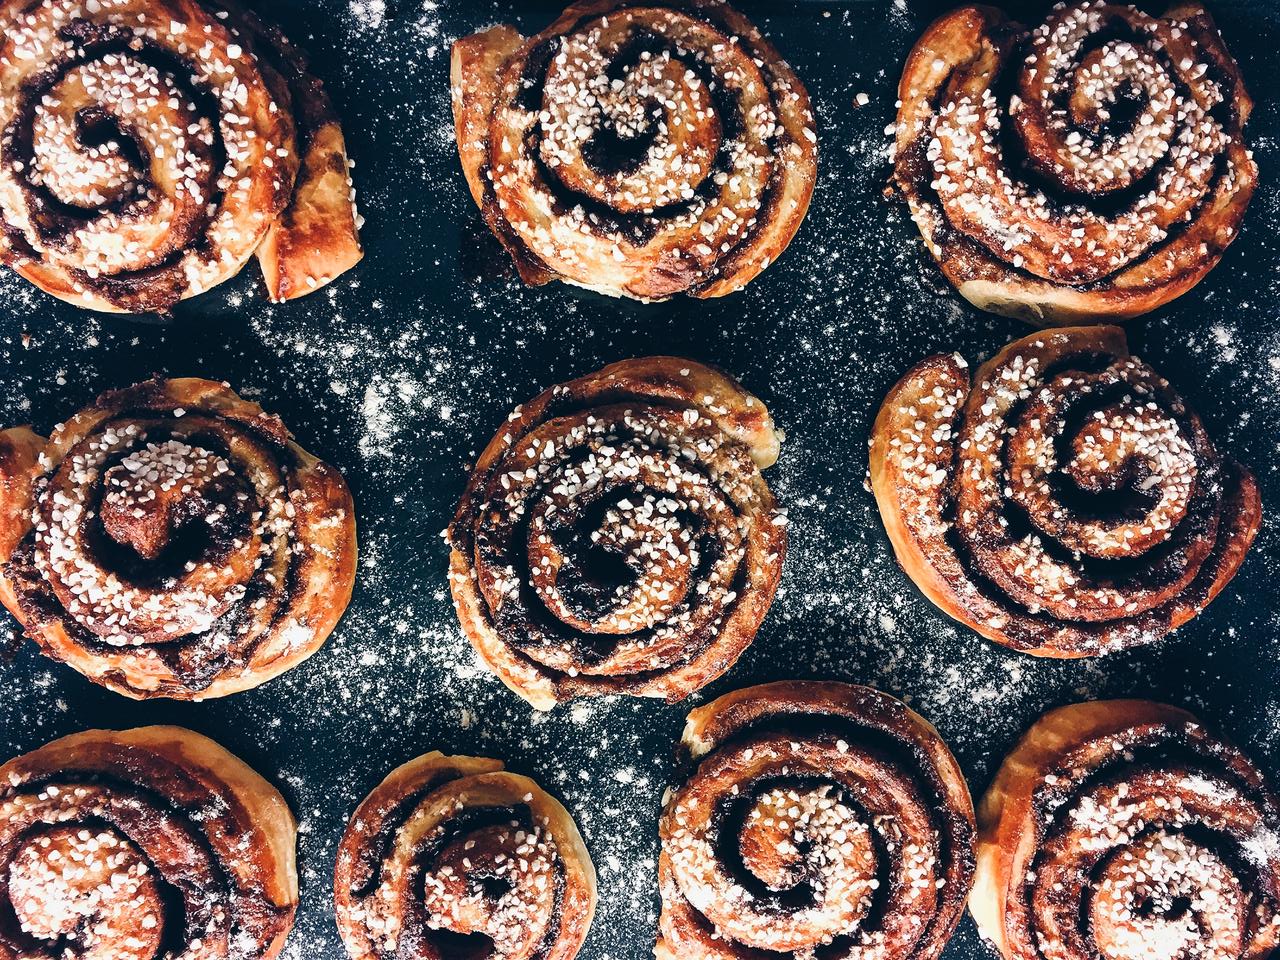 If You Want to Know the European City You Should Be Visiting, 🍝 Eat a Huuuge Meal of Diverse Foods to Find Out Cinnamon Rolls